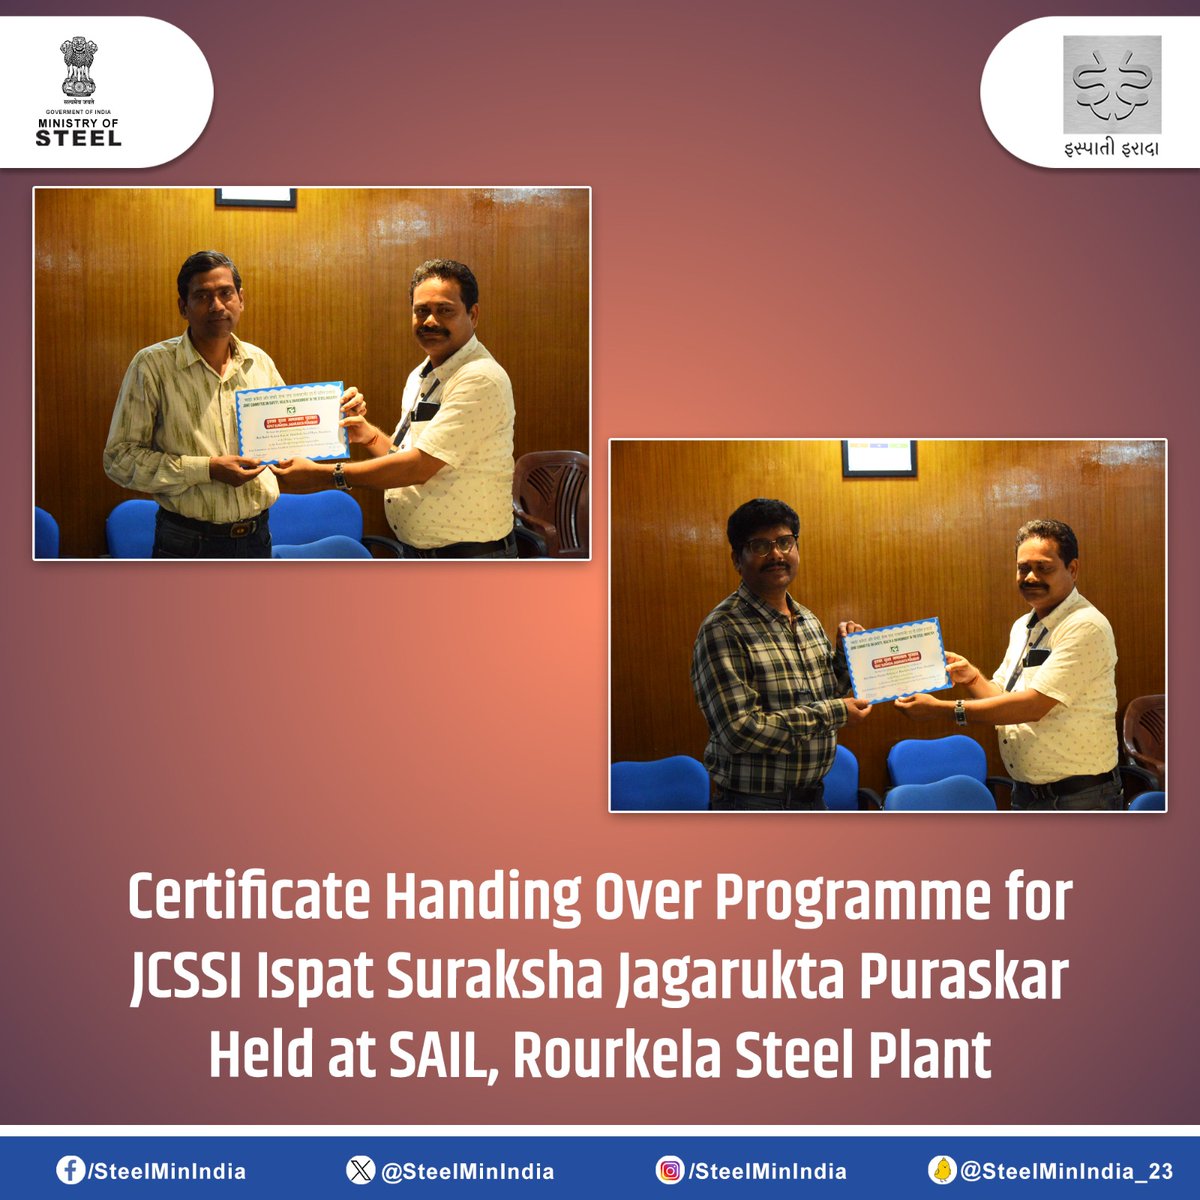 The #JCSSI Ispat Suraksha Jagarukta Puraskar Certificate distribution programme was held at #SAIL, #RourkelaSteelPlant to honor the winners of the poster competition organized by JCSSI on safety, health, and environment in the steel industry.